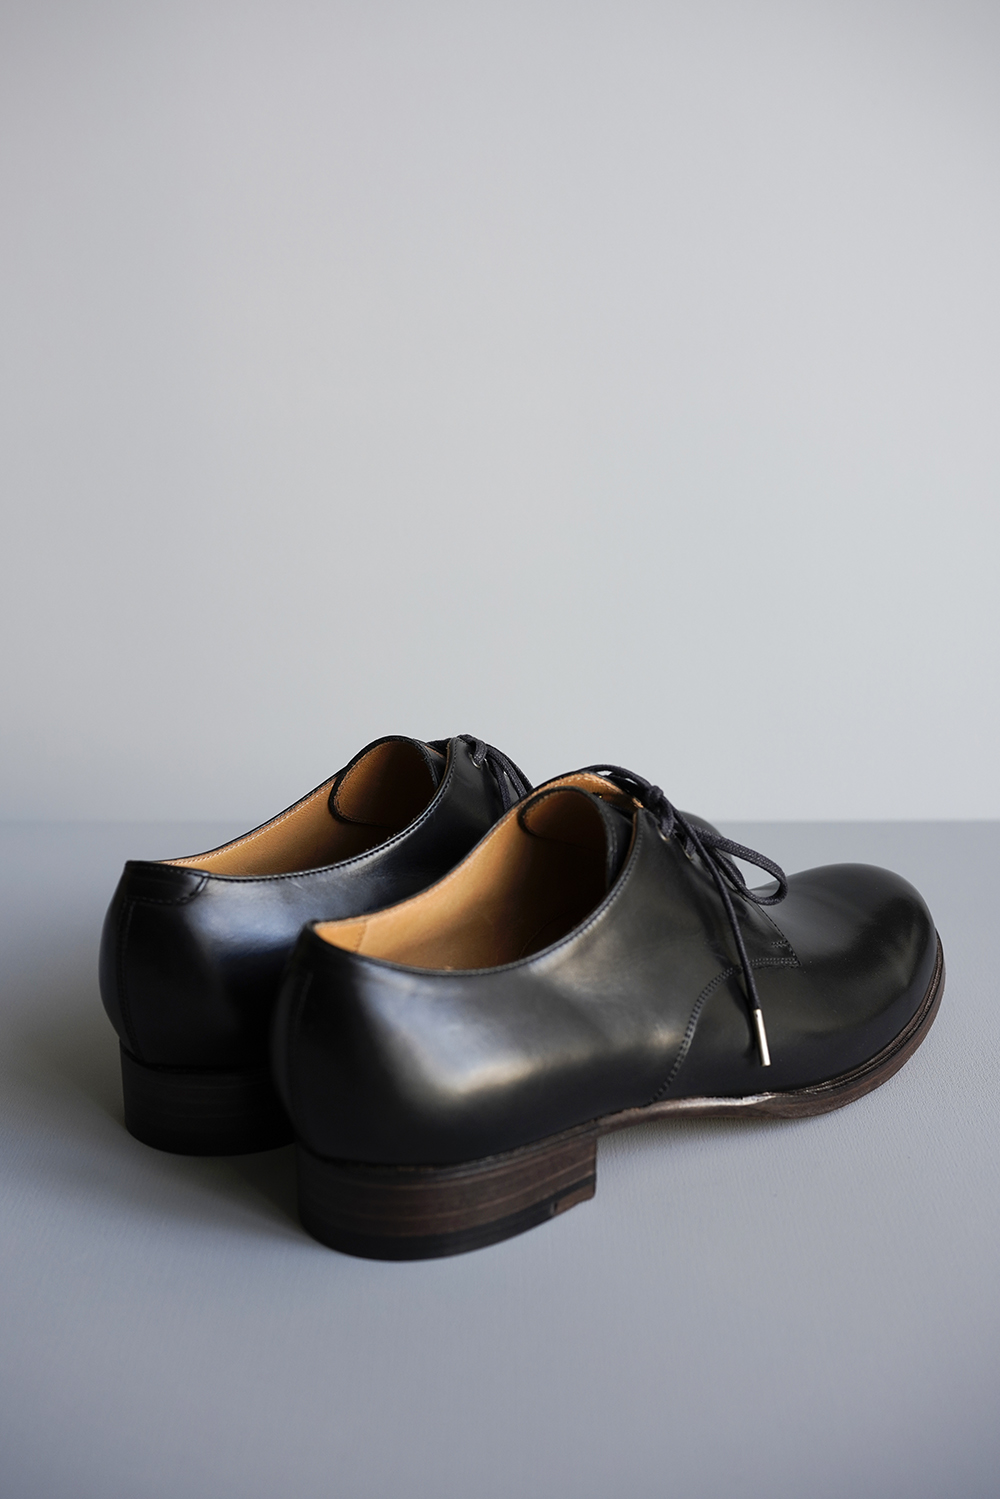 Blucher plain toe 4 hole/Baby calf mckay   ANOTHER LOUNGE